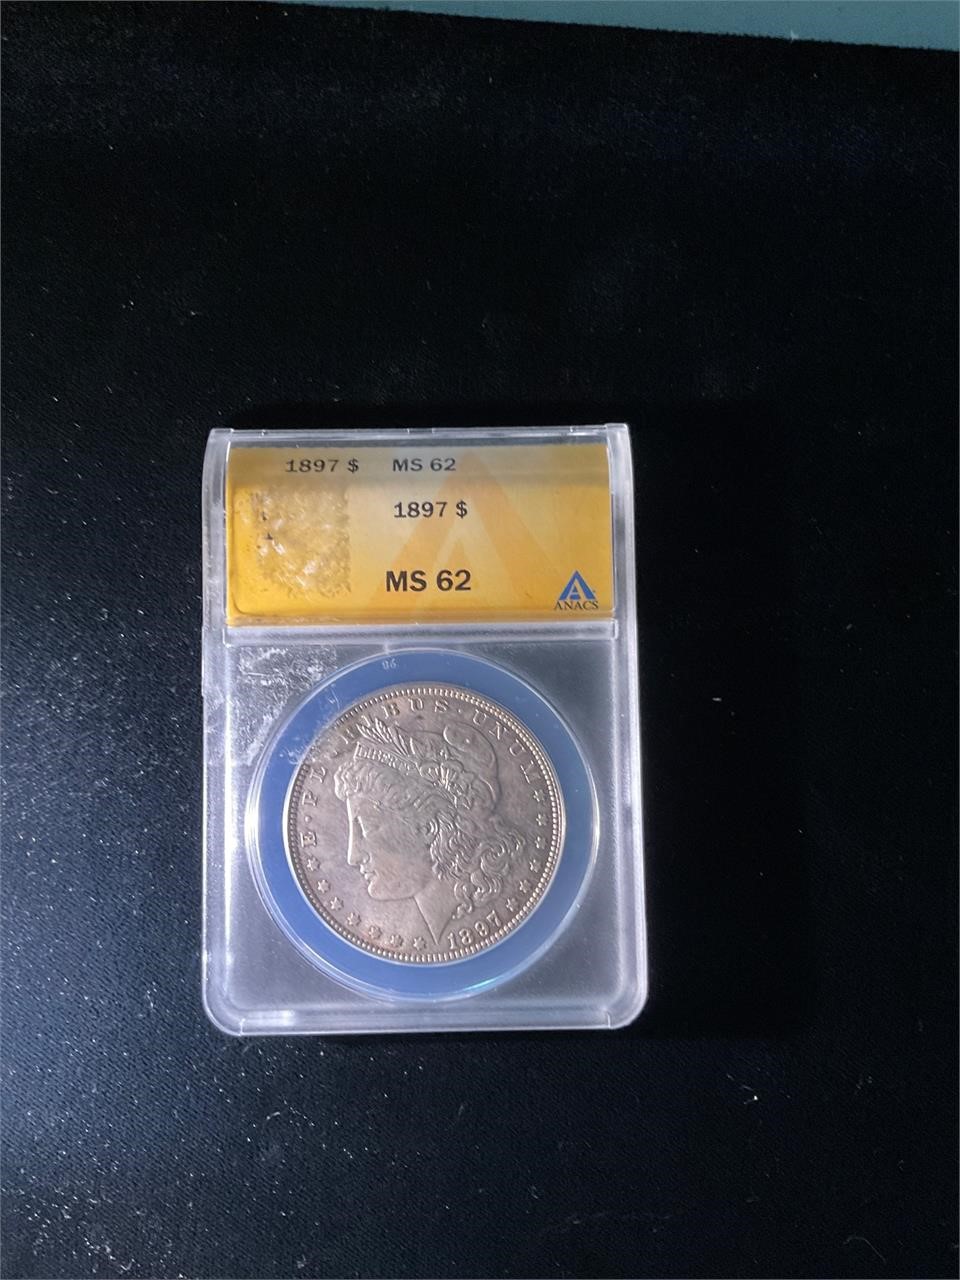 Coin Auction, Uncirculated silver eagles, much more.